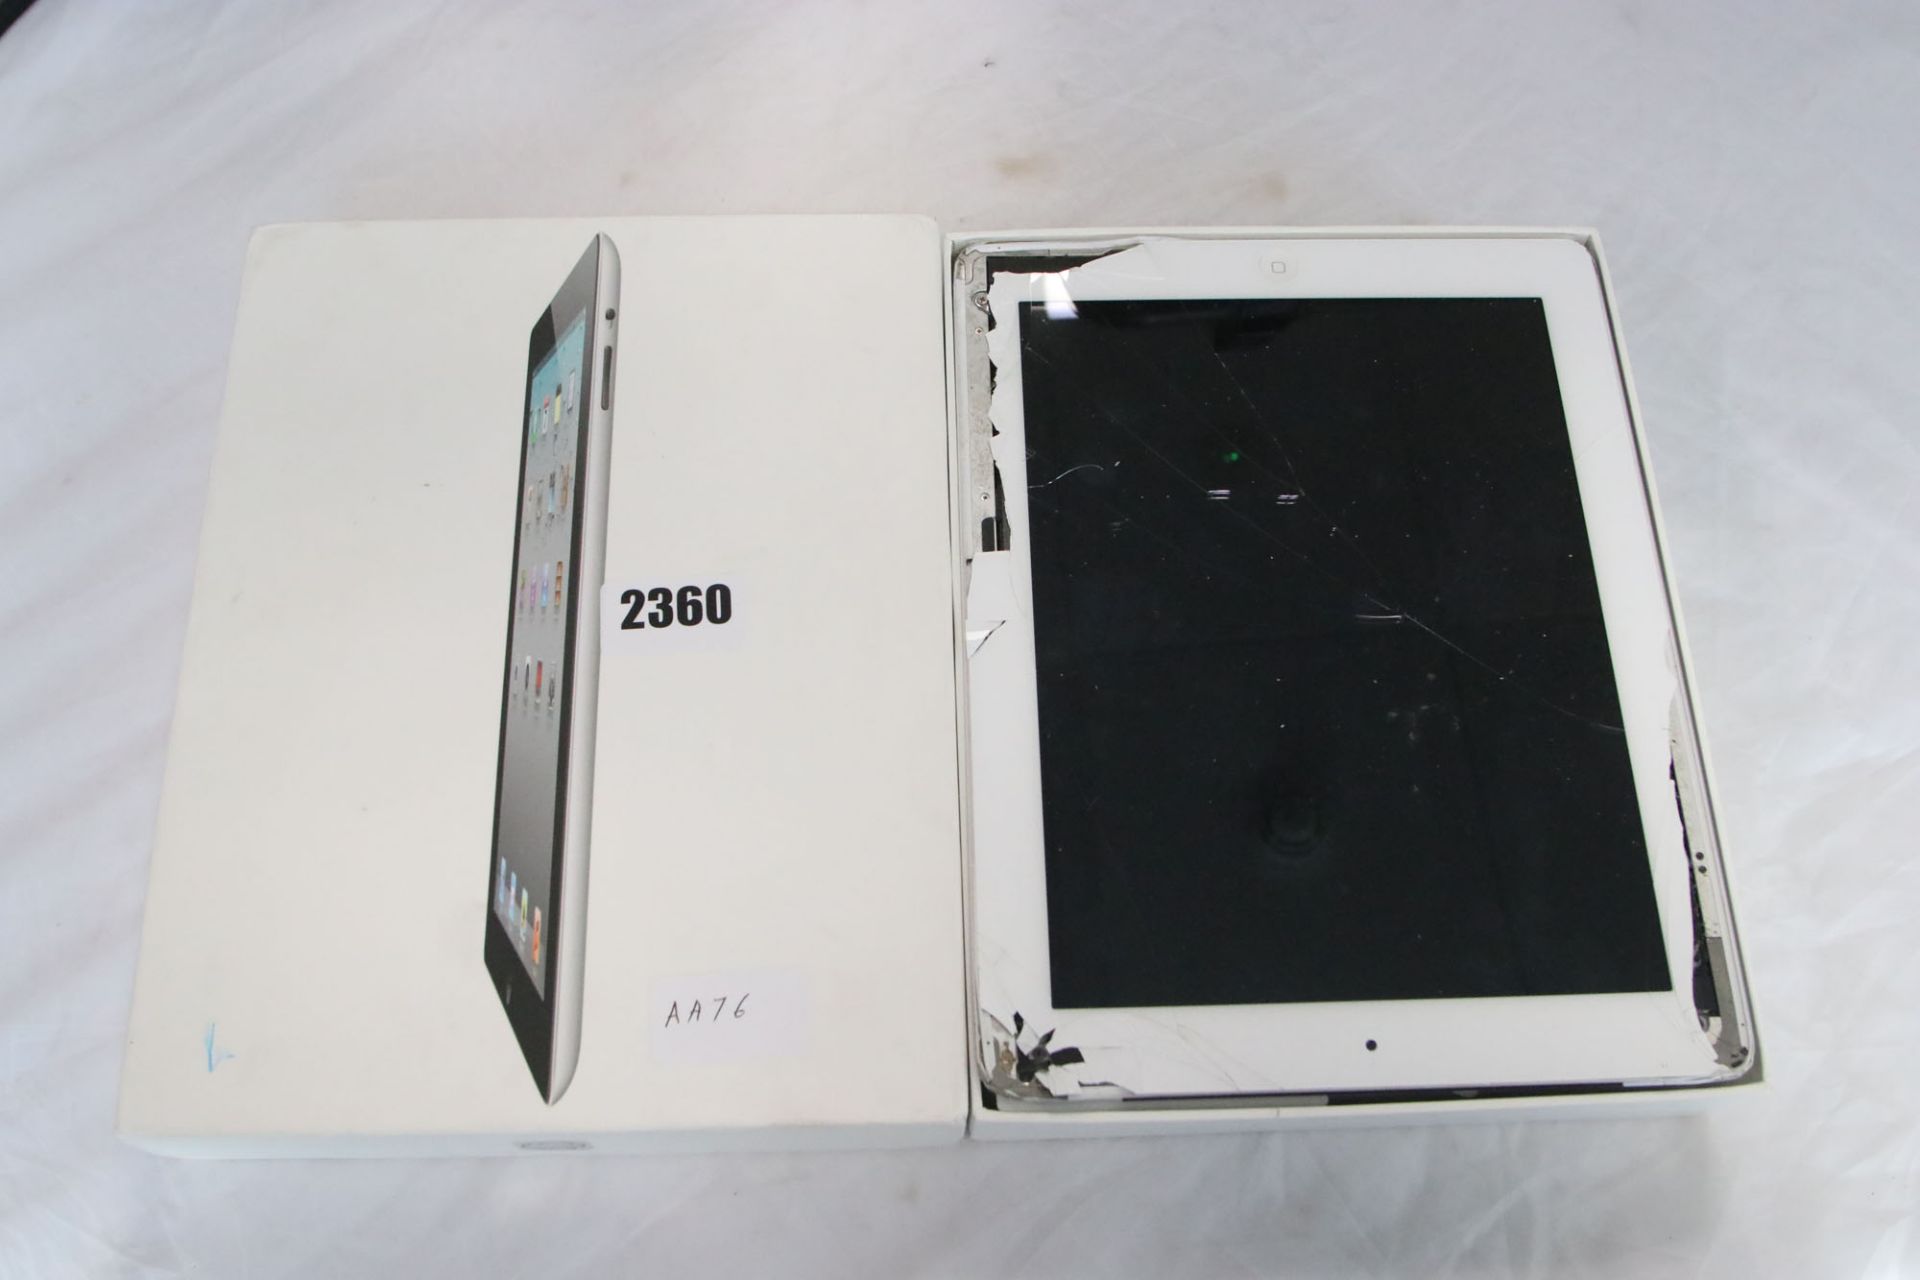 Apple iPad model A1430 16gb (possibly locked to iCloud account, screen and chassis badly smashed,